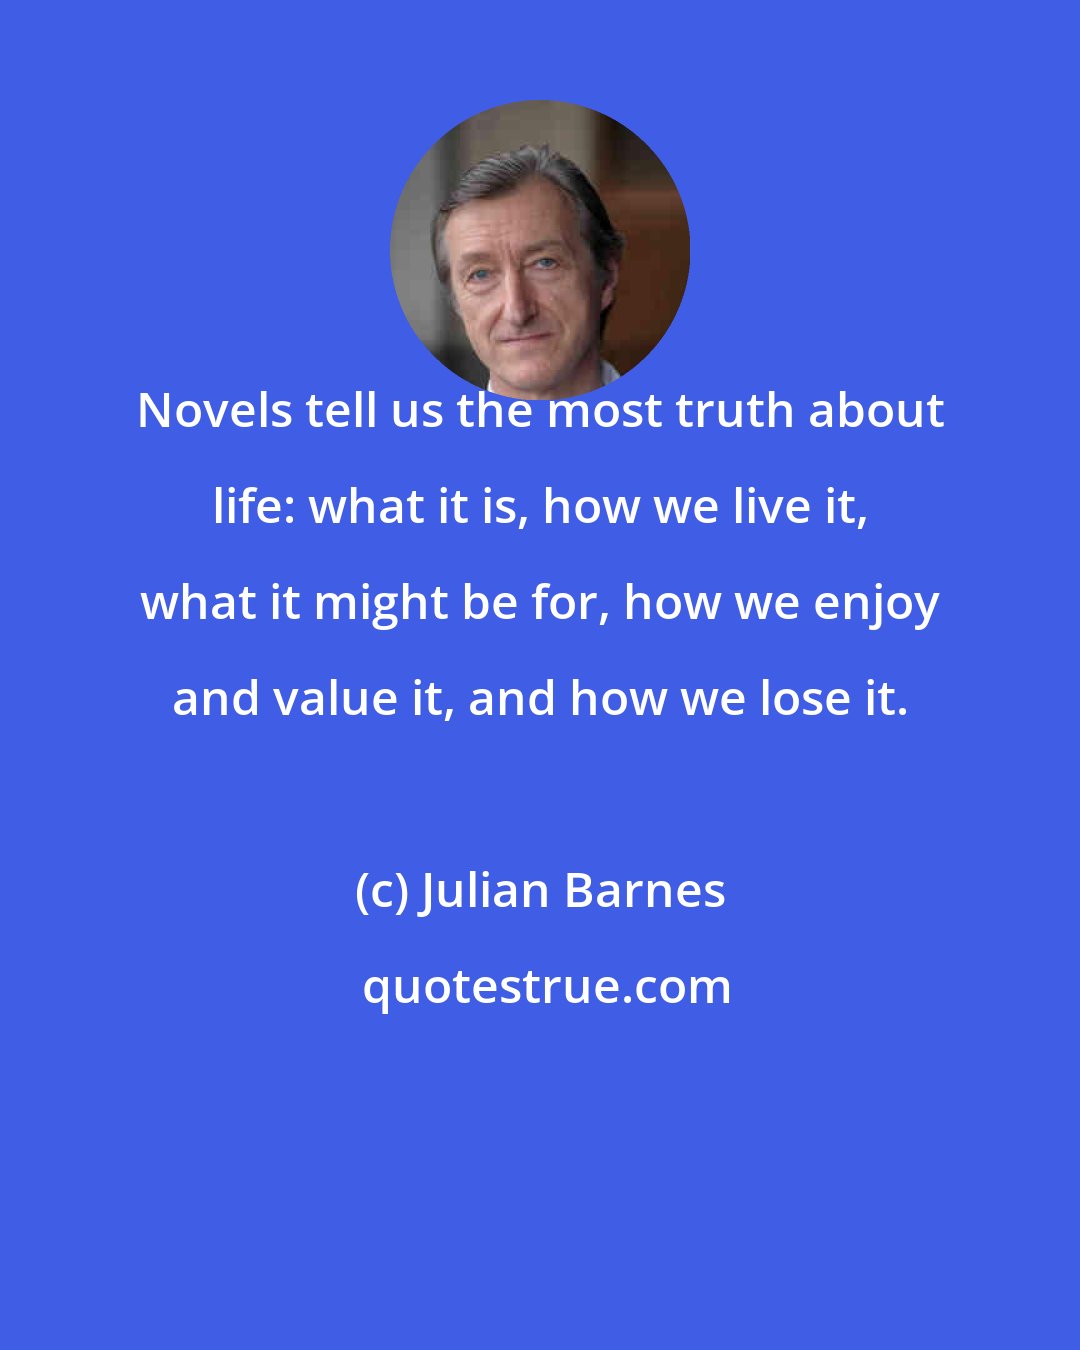 Julian Barnes: Novels tell us the most truth about life: what it is, how we live it, what it might be for, how we enjoy and value it, and how we lose it.